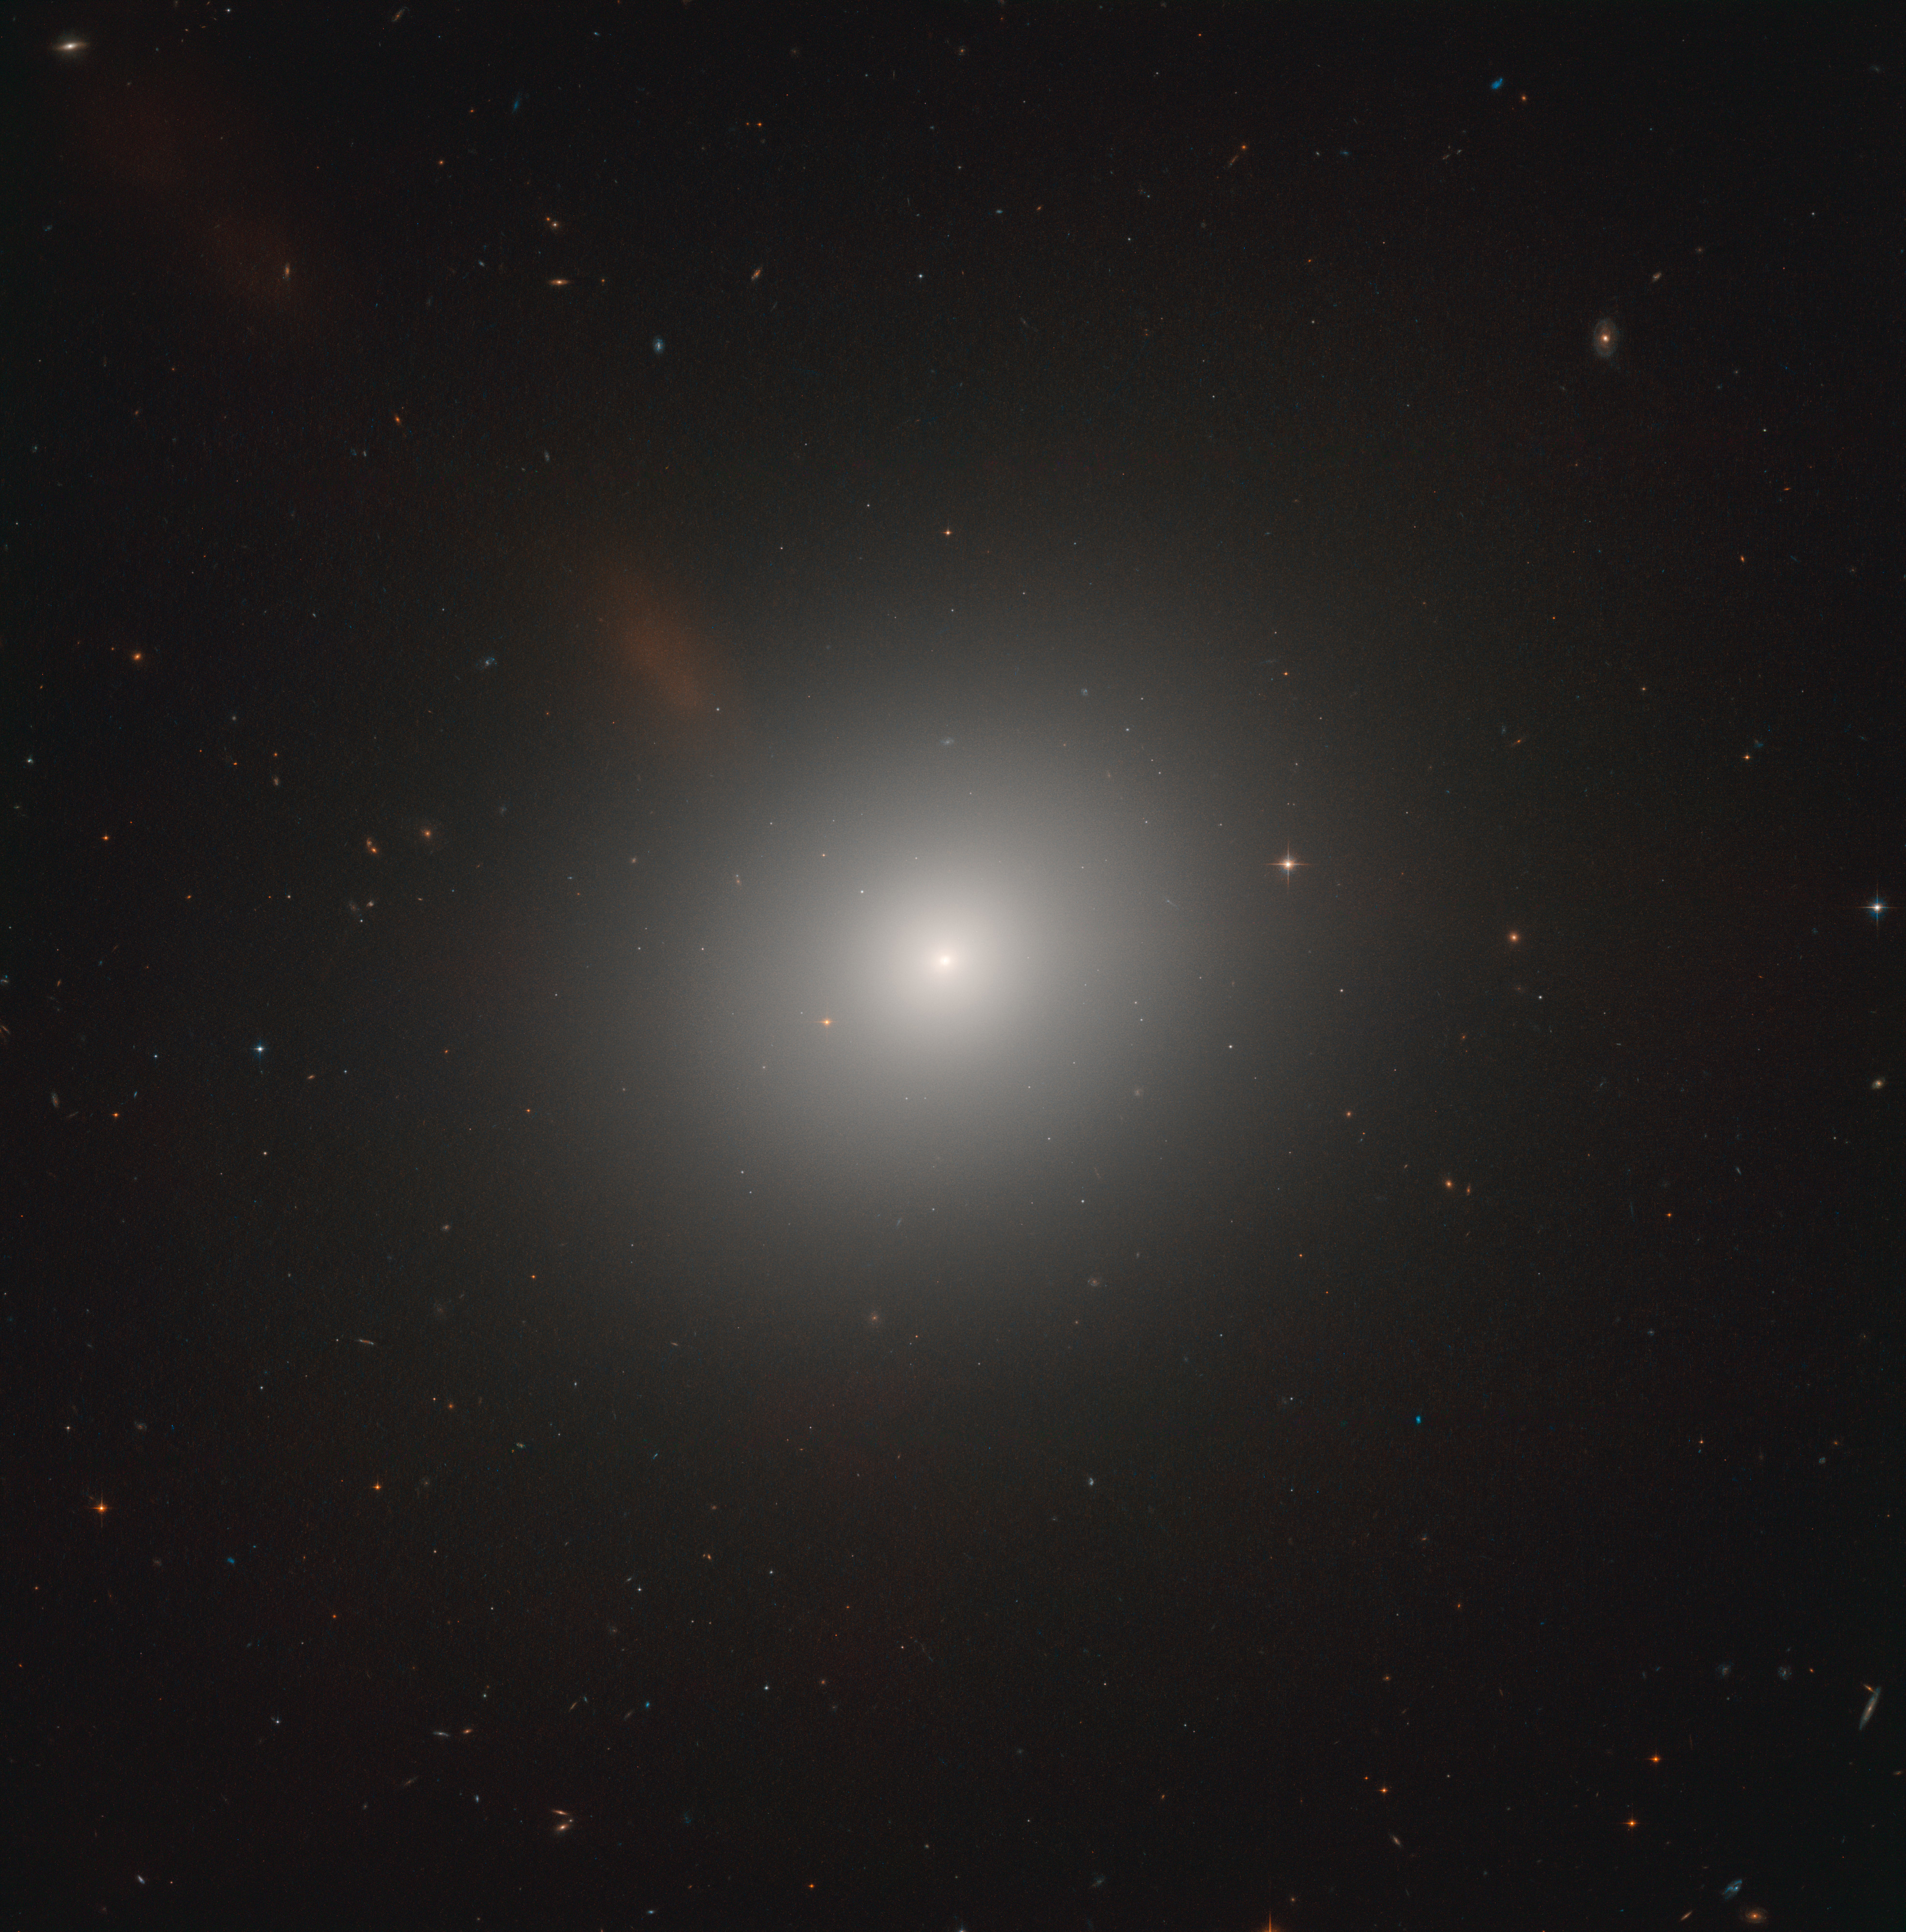 The bright-white, diffuse glow of an elliptical galaxy sits at image center. The galaxy's core appears as an intense-white circle that gets more diffuse as you move outward from the core. A rusty-red, diffuse cloud is visible to the upper-left of the galaxy. It extends to the upper-left corner of the image, where it is very faint. Black background dotted with foreground stars and distant galaxies.